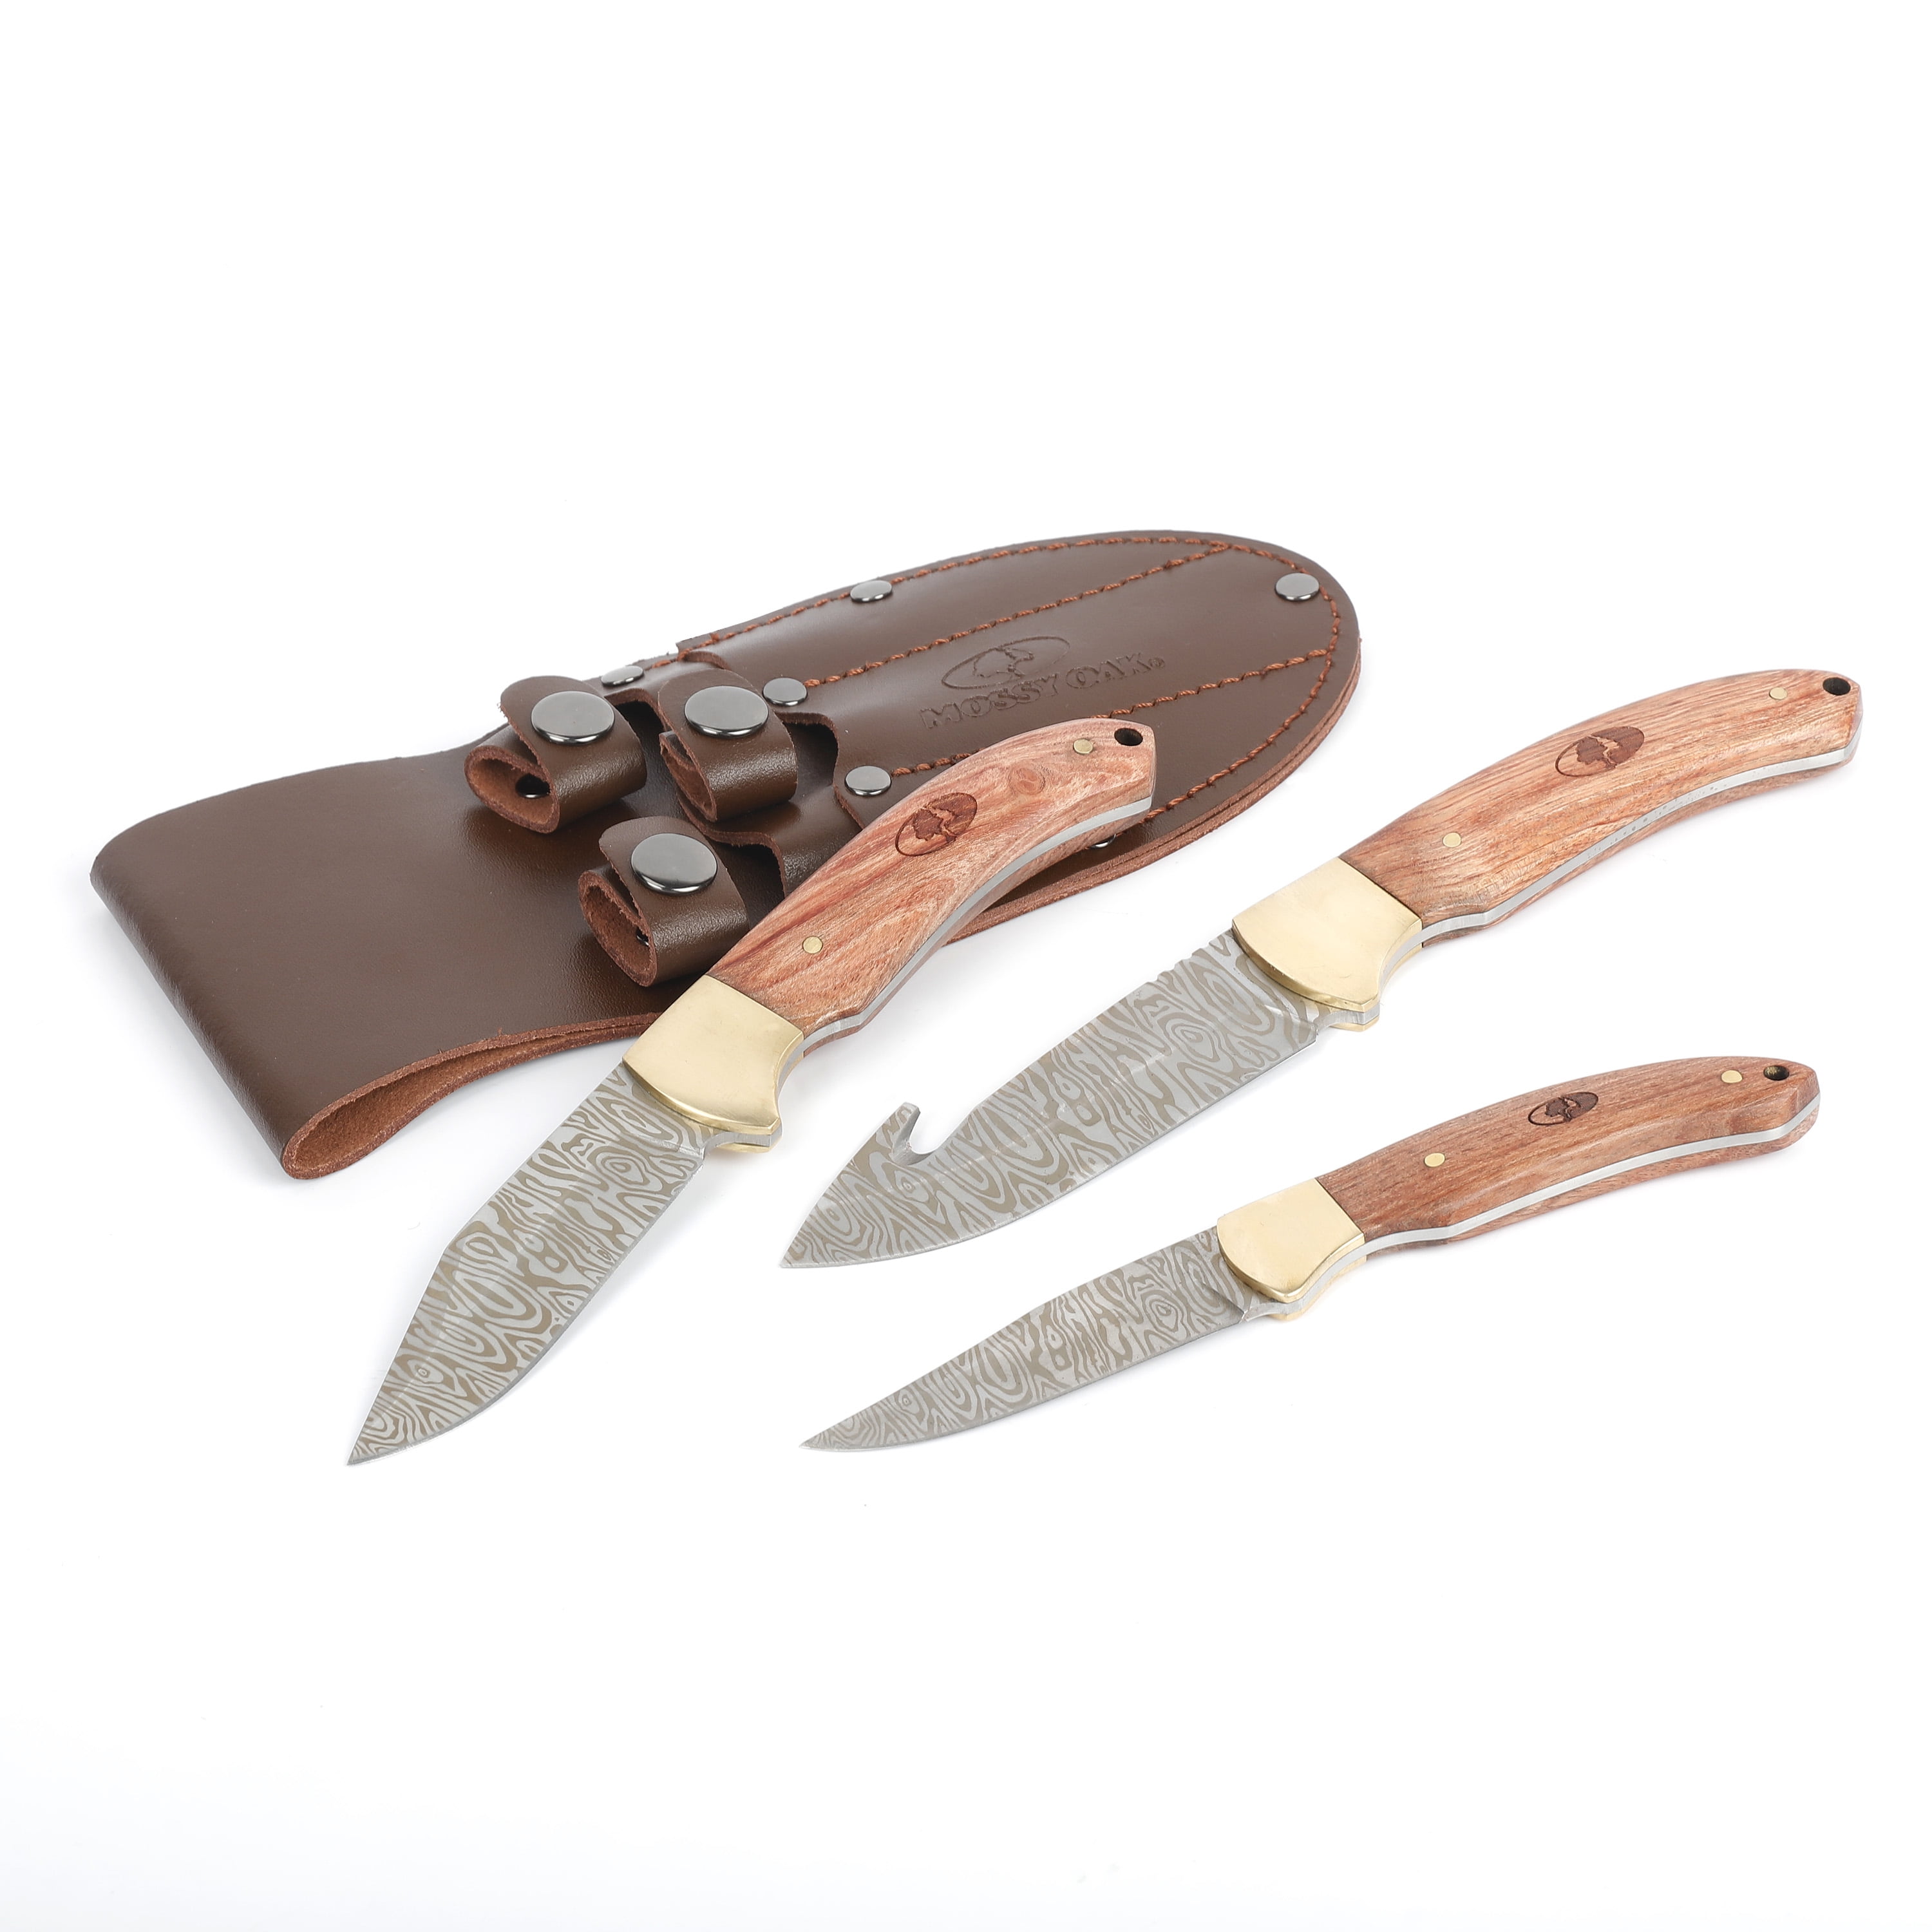 Mossy Oak 3-Piece Stag Finish Knife Set with Stainless Steel Full Tang Blade  and Leather Sheath 